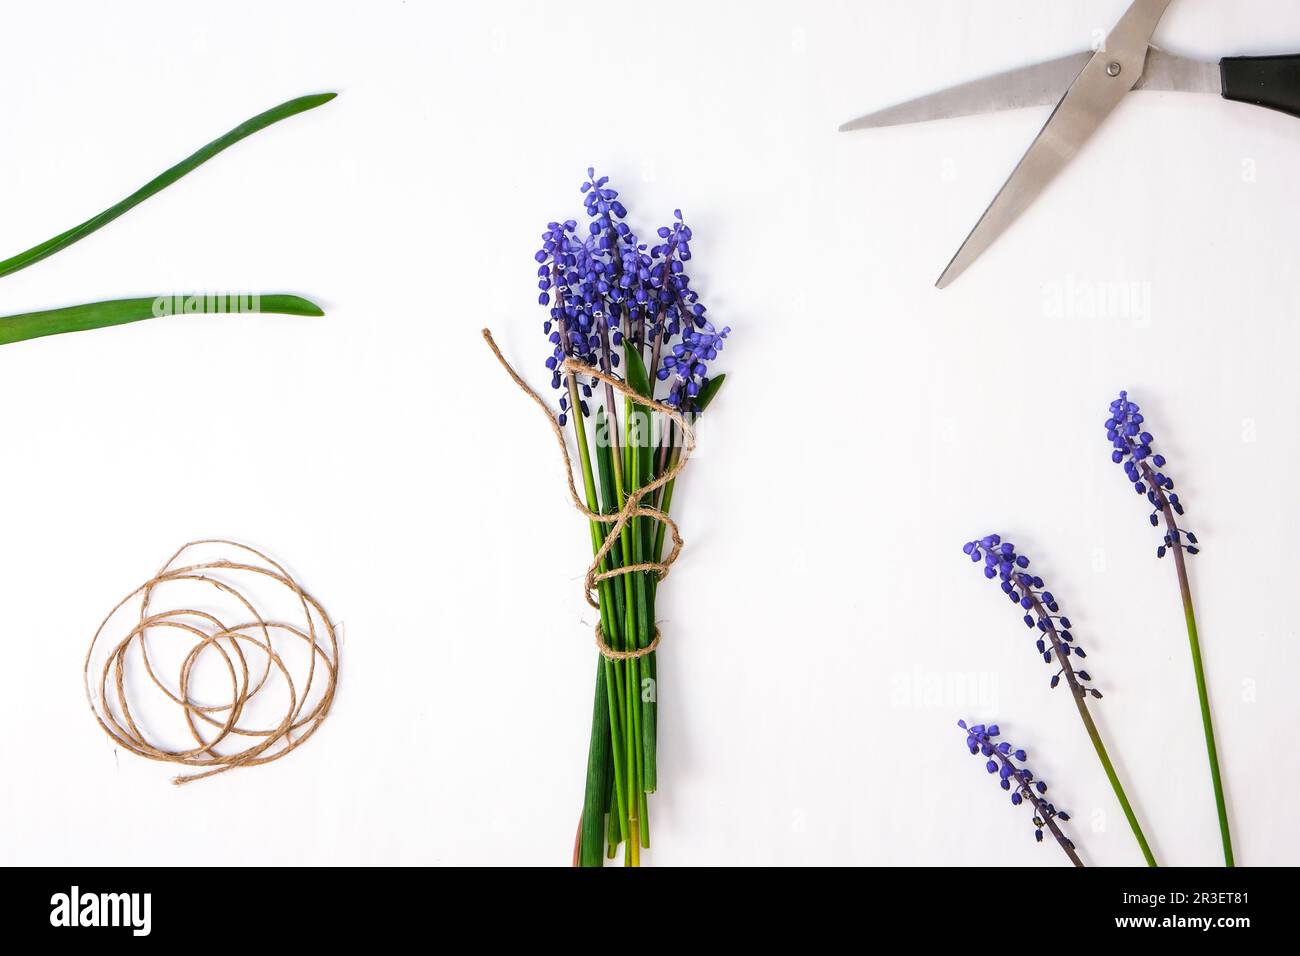 Female hands collect bouquet of blue muscari as a gift. Local small business Pruning flowers. Florist in flower shop. Eco-style. Stock Photo